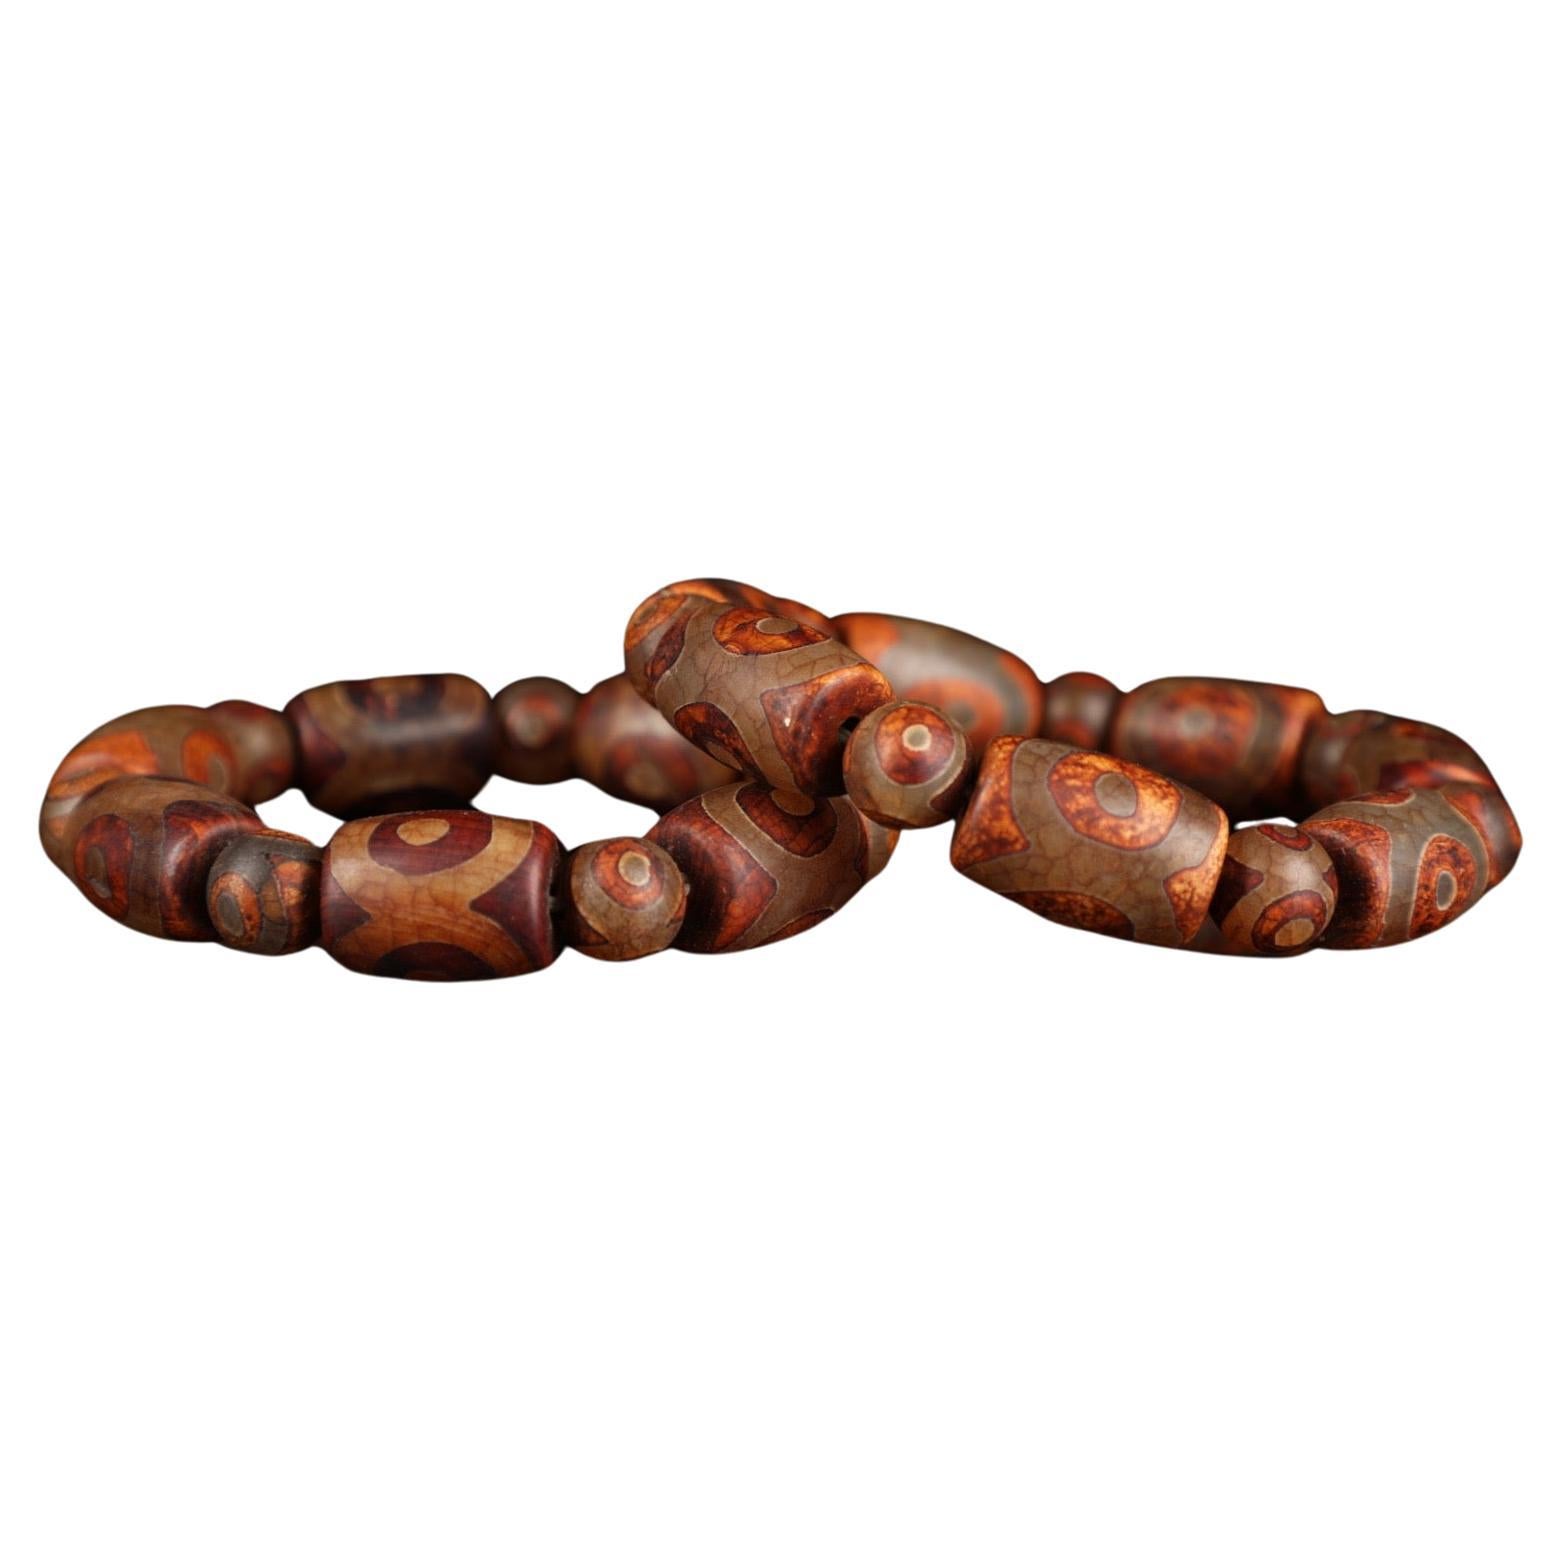 Antique Imperial Dzi Beads Bracelets Pair From China For Sale